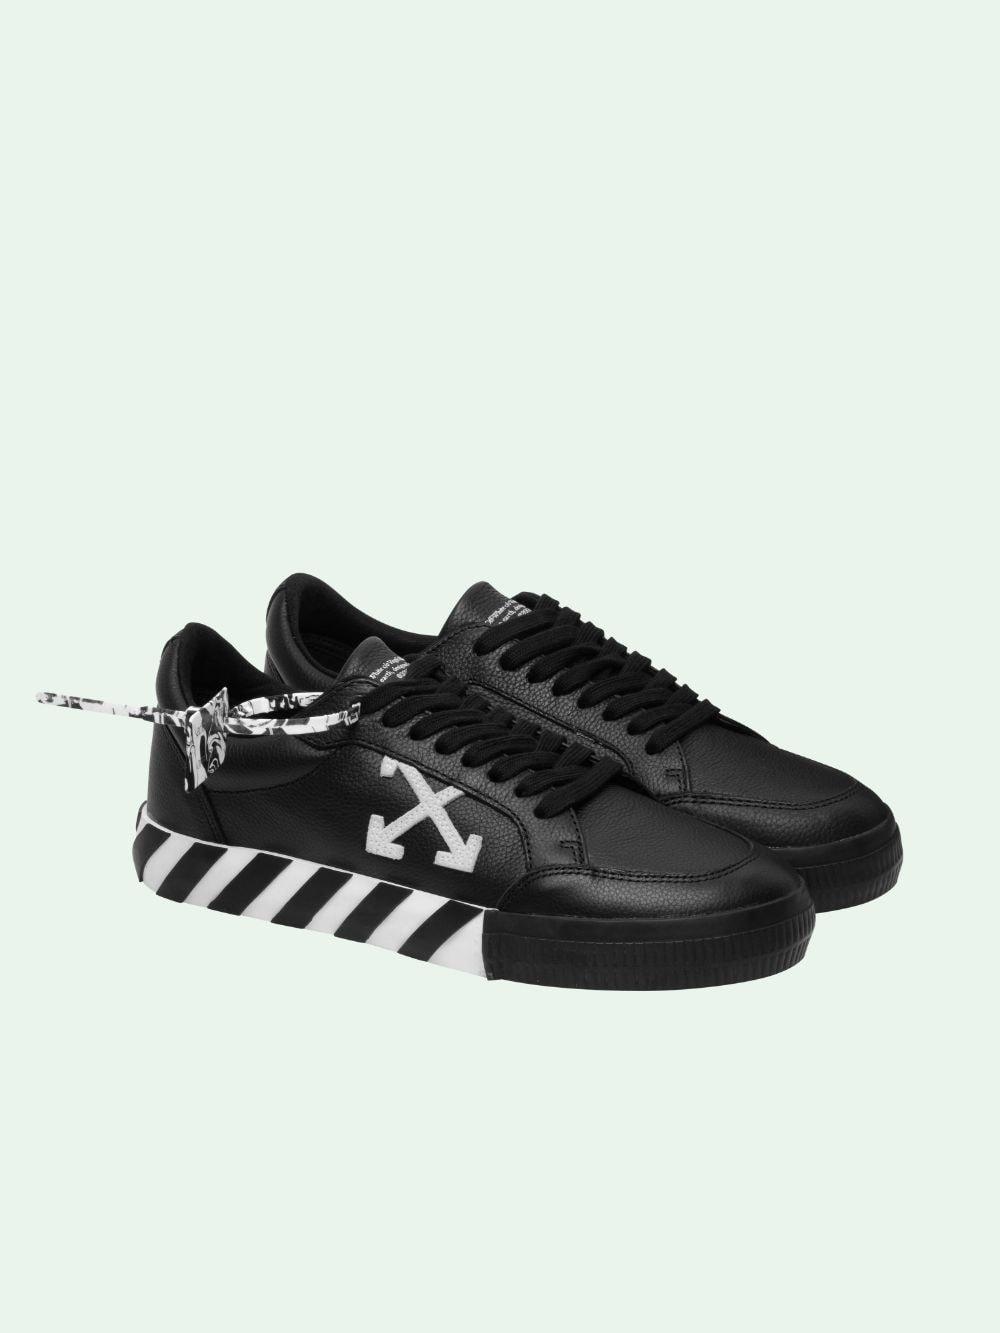 Off-White c/o Virgil Abloh Vulcan Low Leather Trainers in Black/White ...